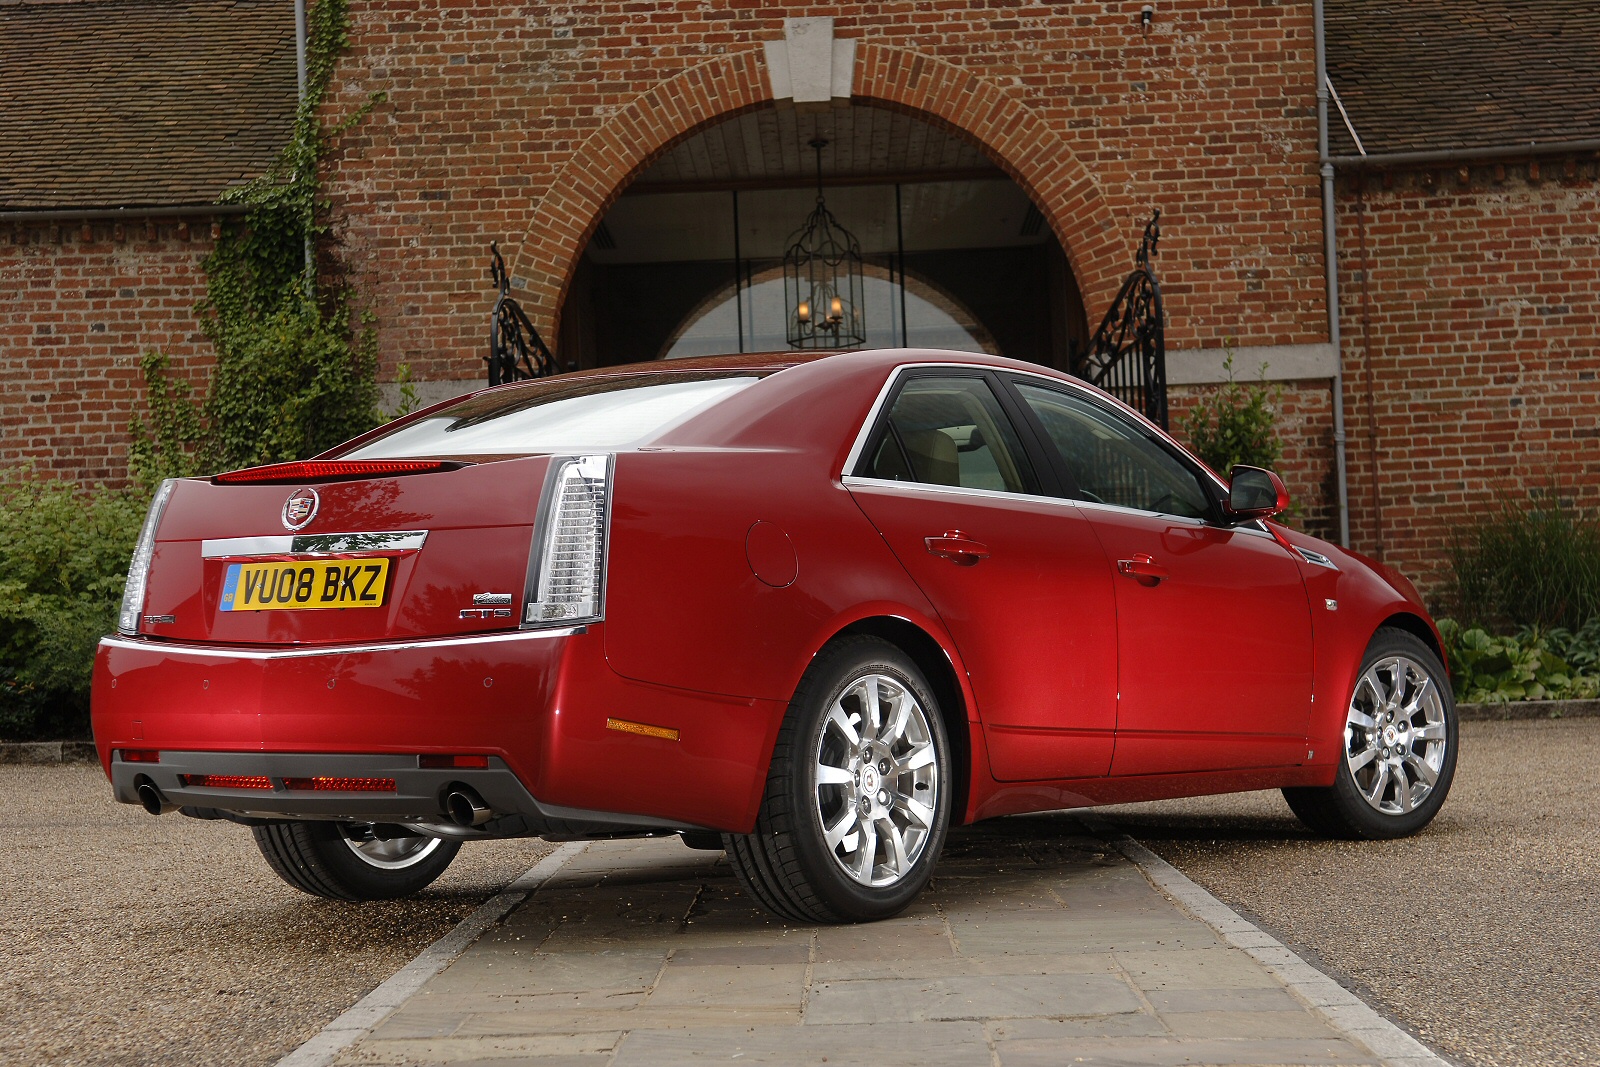 In the past, UK-bound Cadillacs have been depressingly easy to poke fun at.